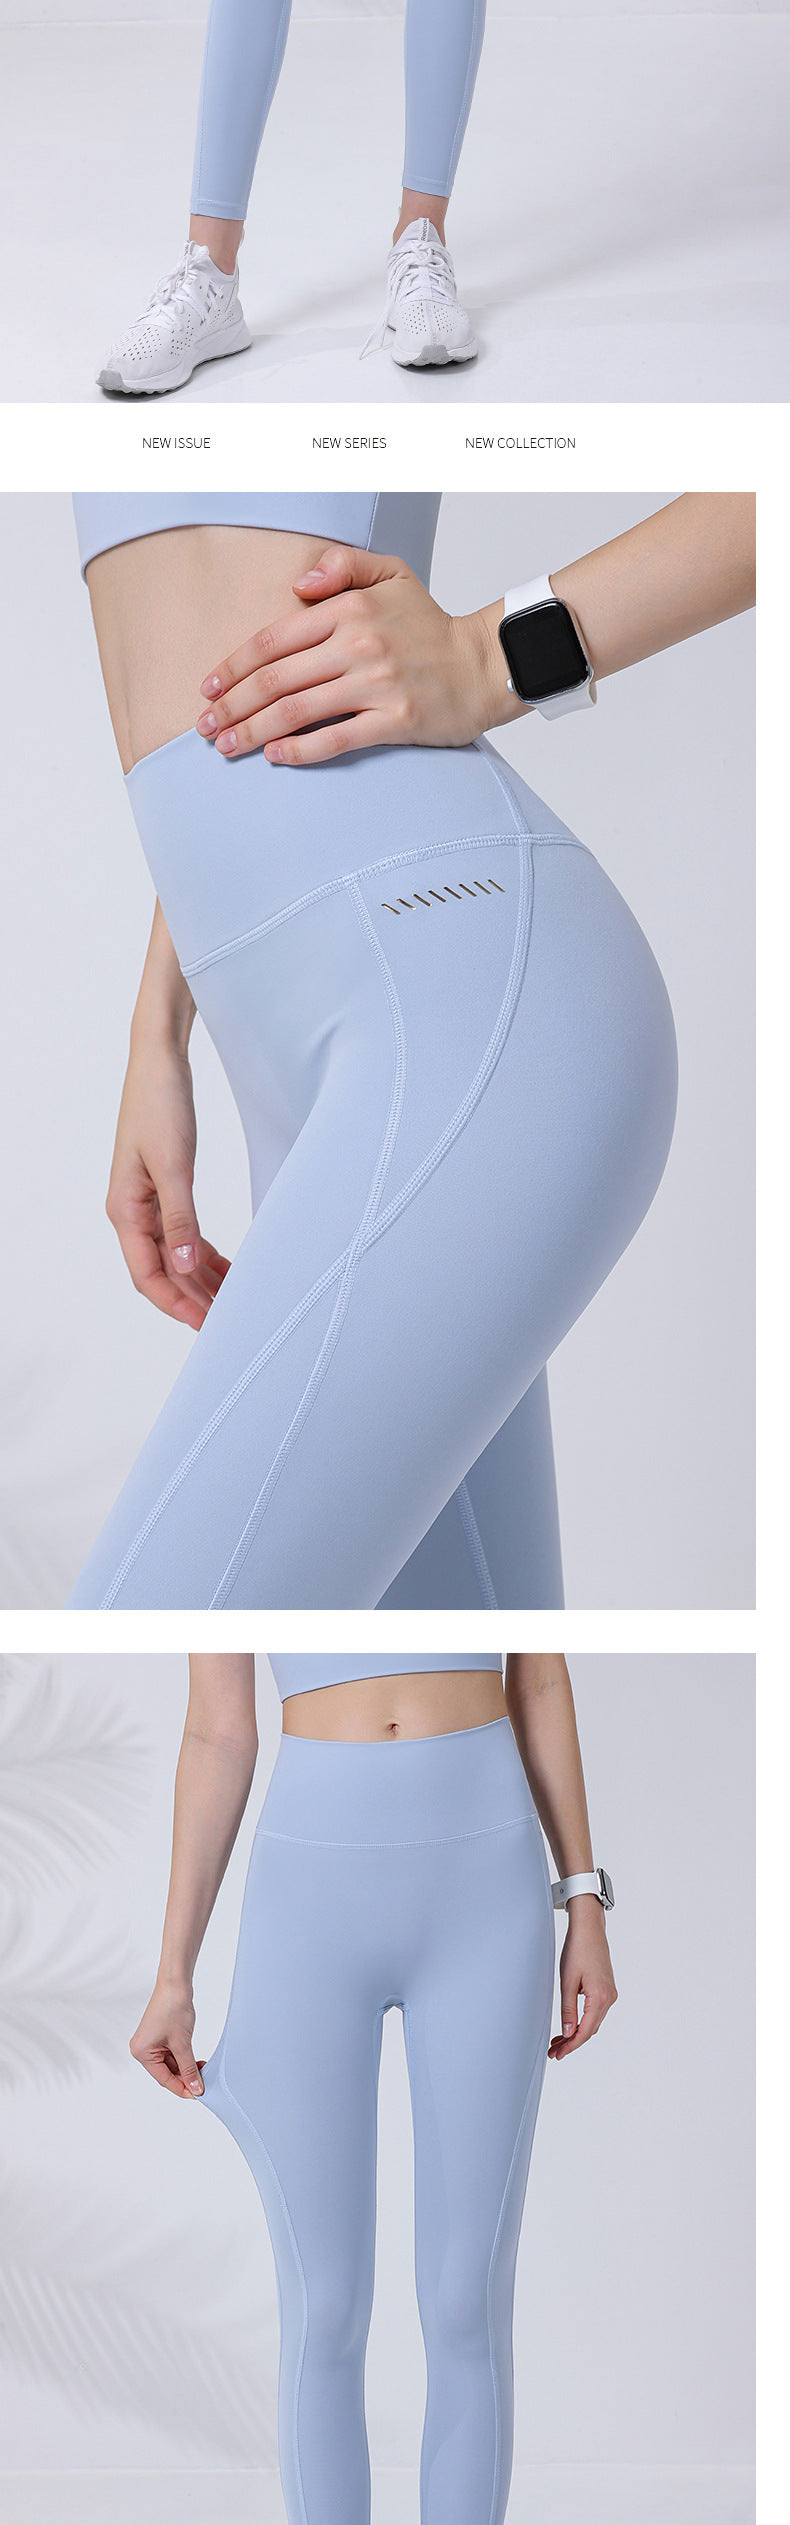 summer new skin-friendly sports trousers women's high waist hip-lifting tight-fitting fitness running yoga pants